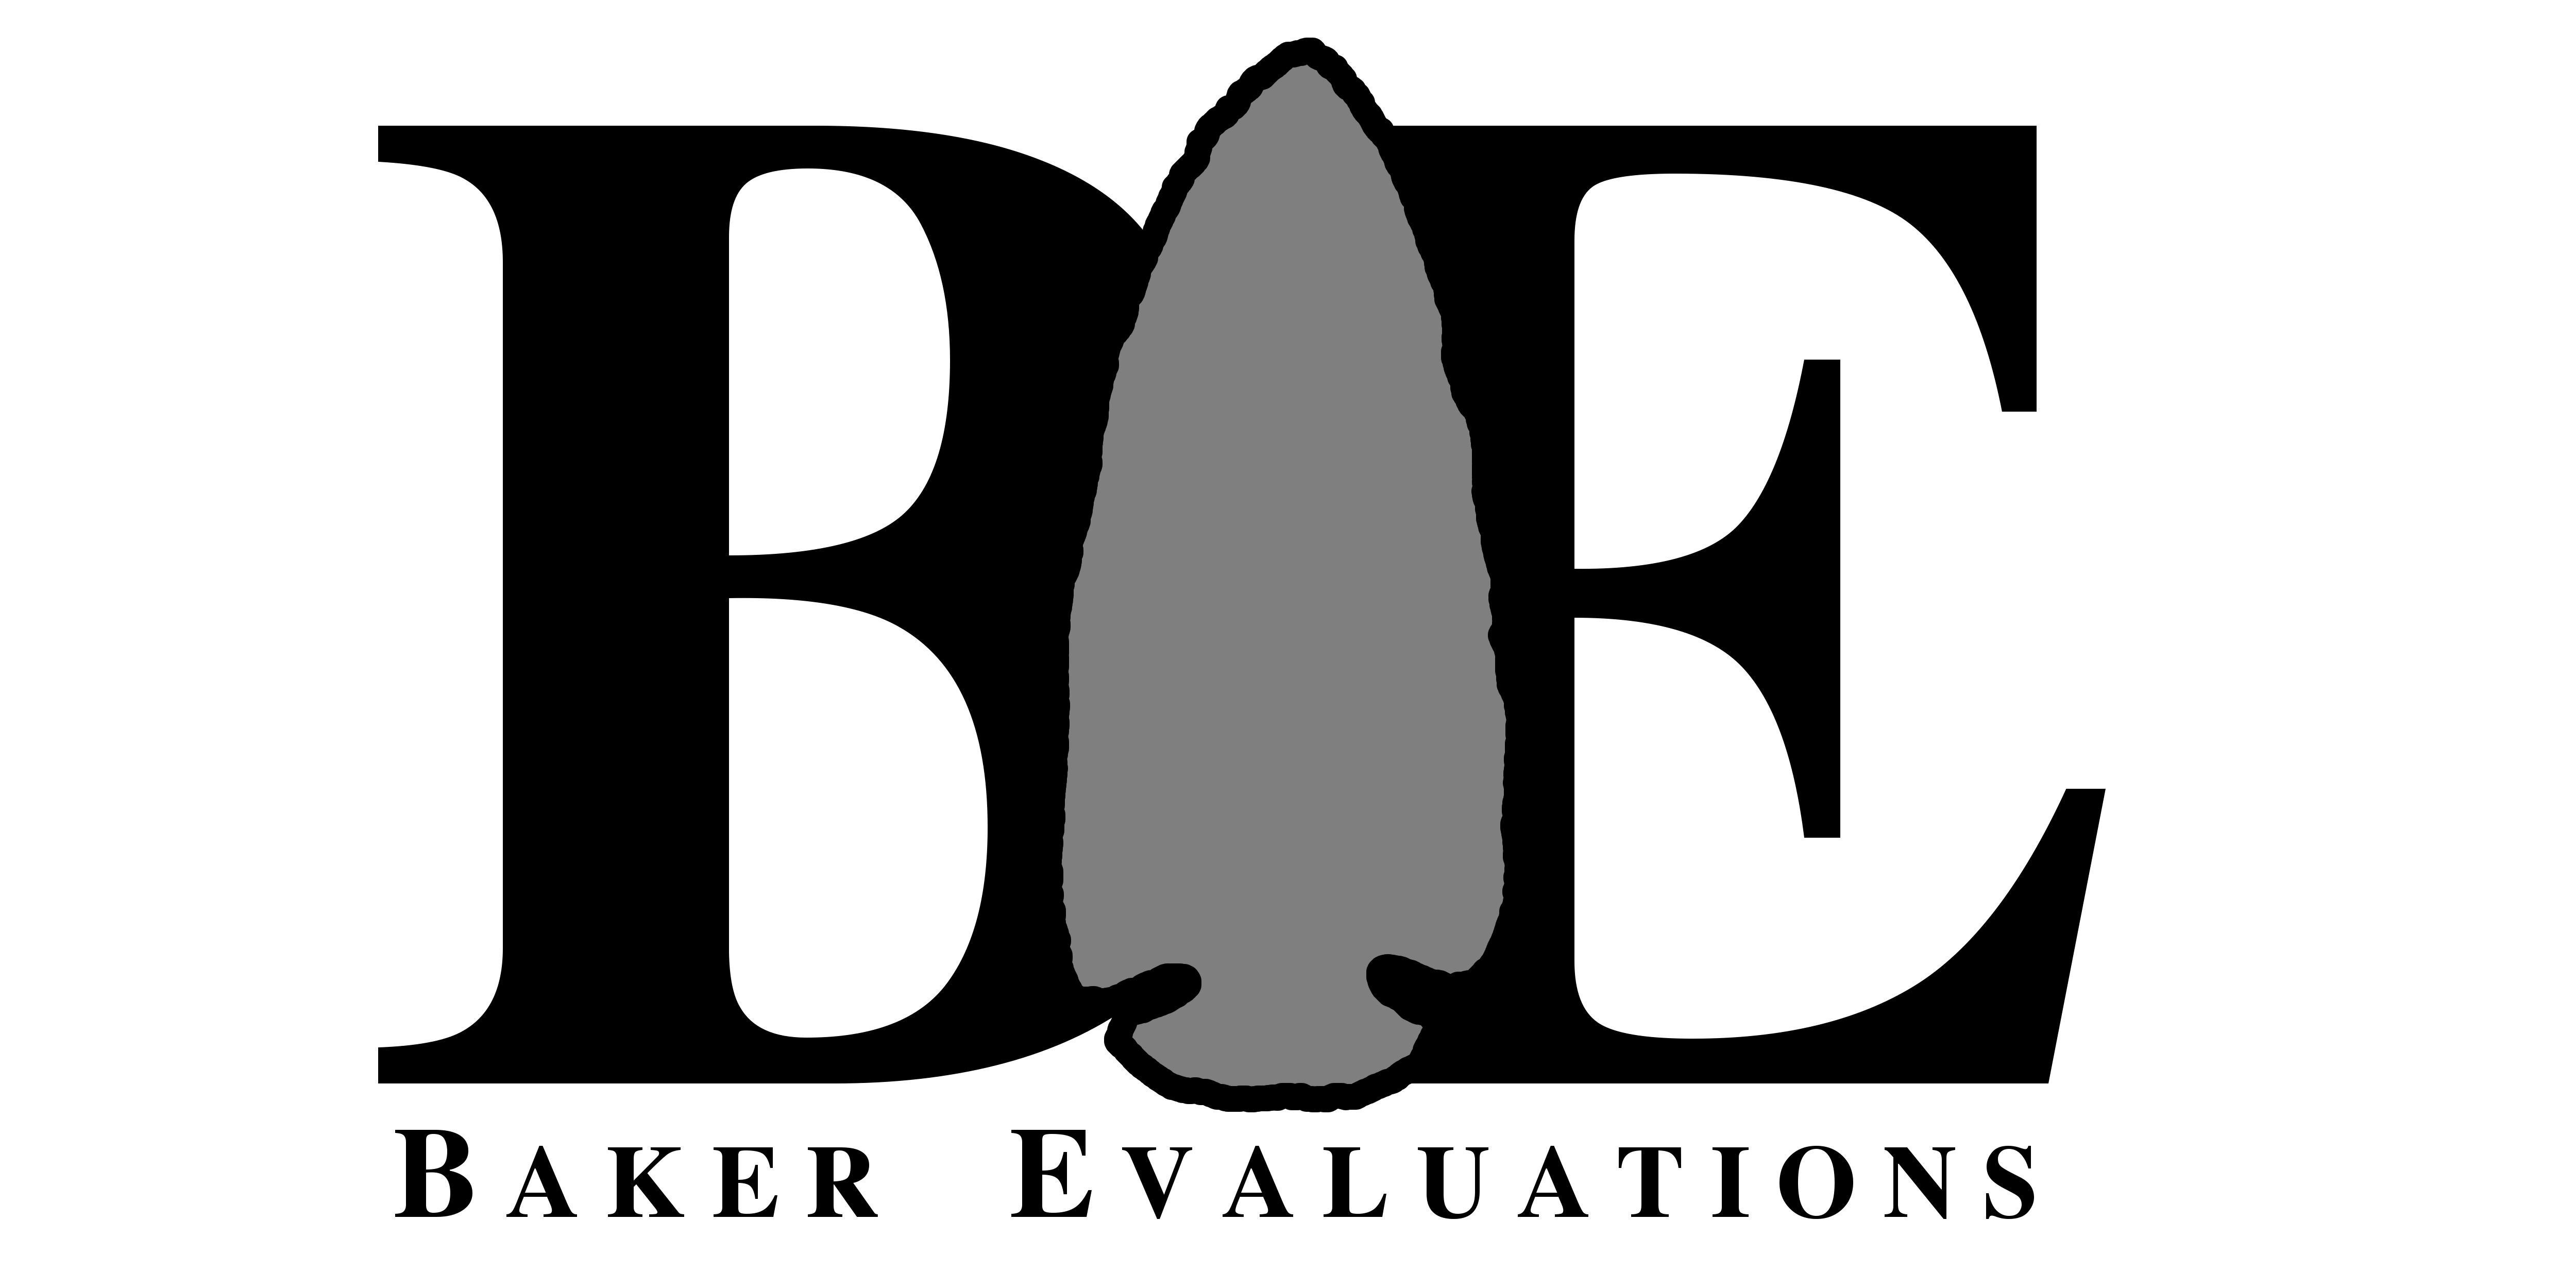 Black and White Evaluation Logo - Services